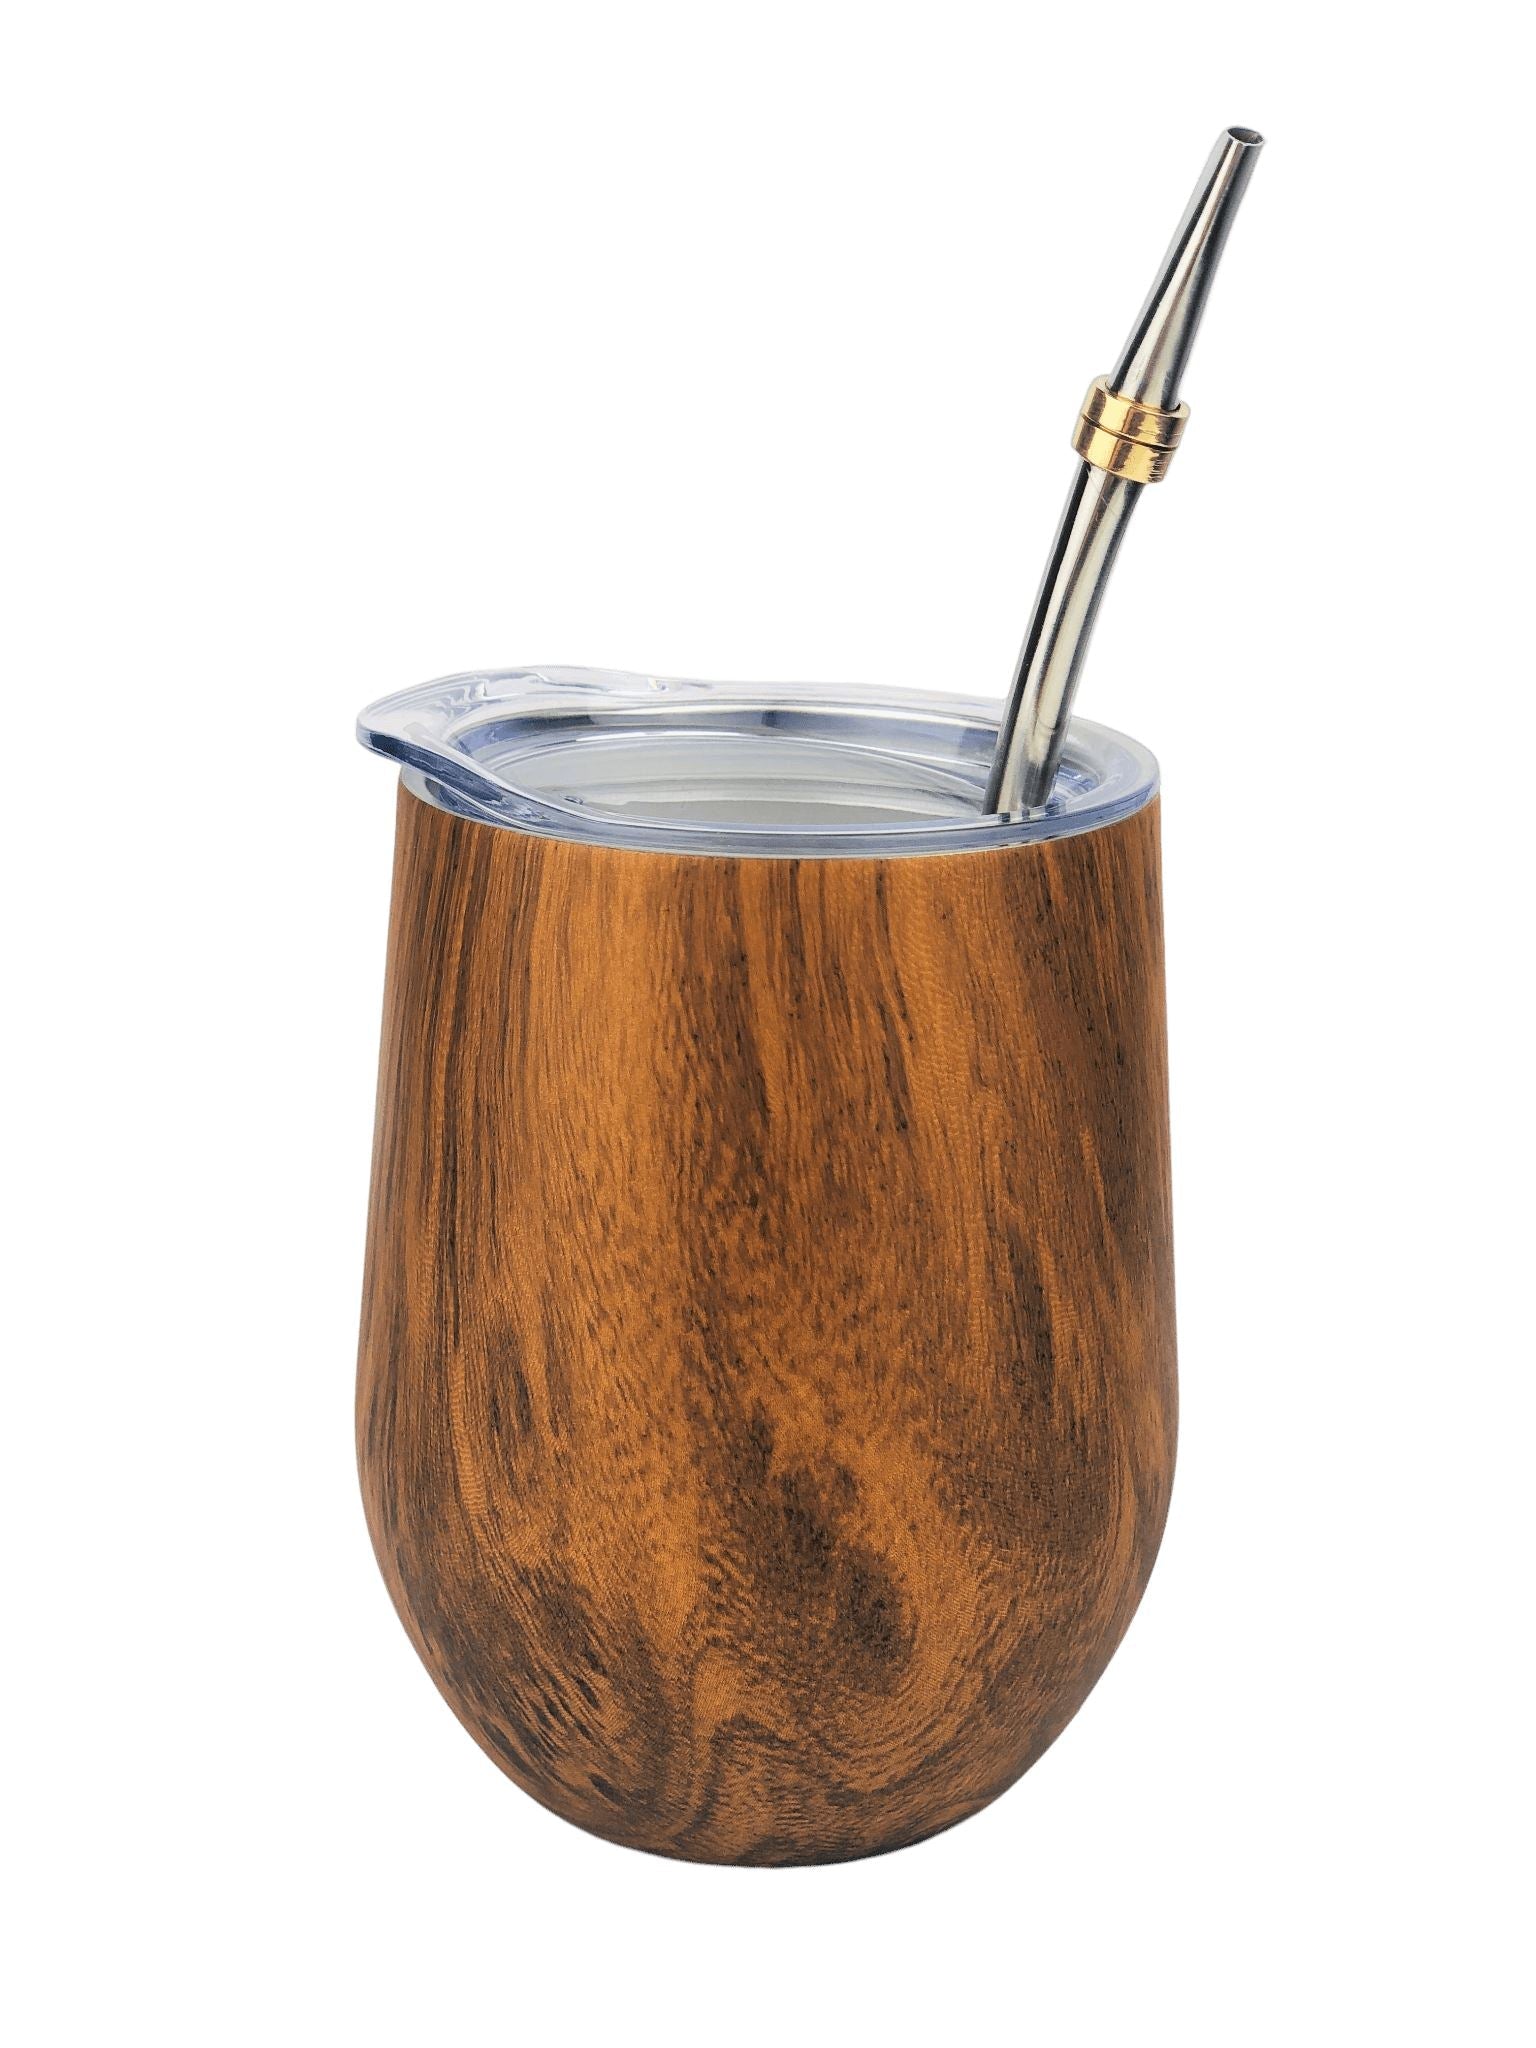 SSteel Mate Gourd and Straws Set - Wood (Mate and bombillas) Mates Hispanic Pantry 